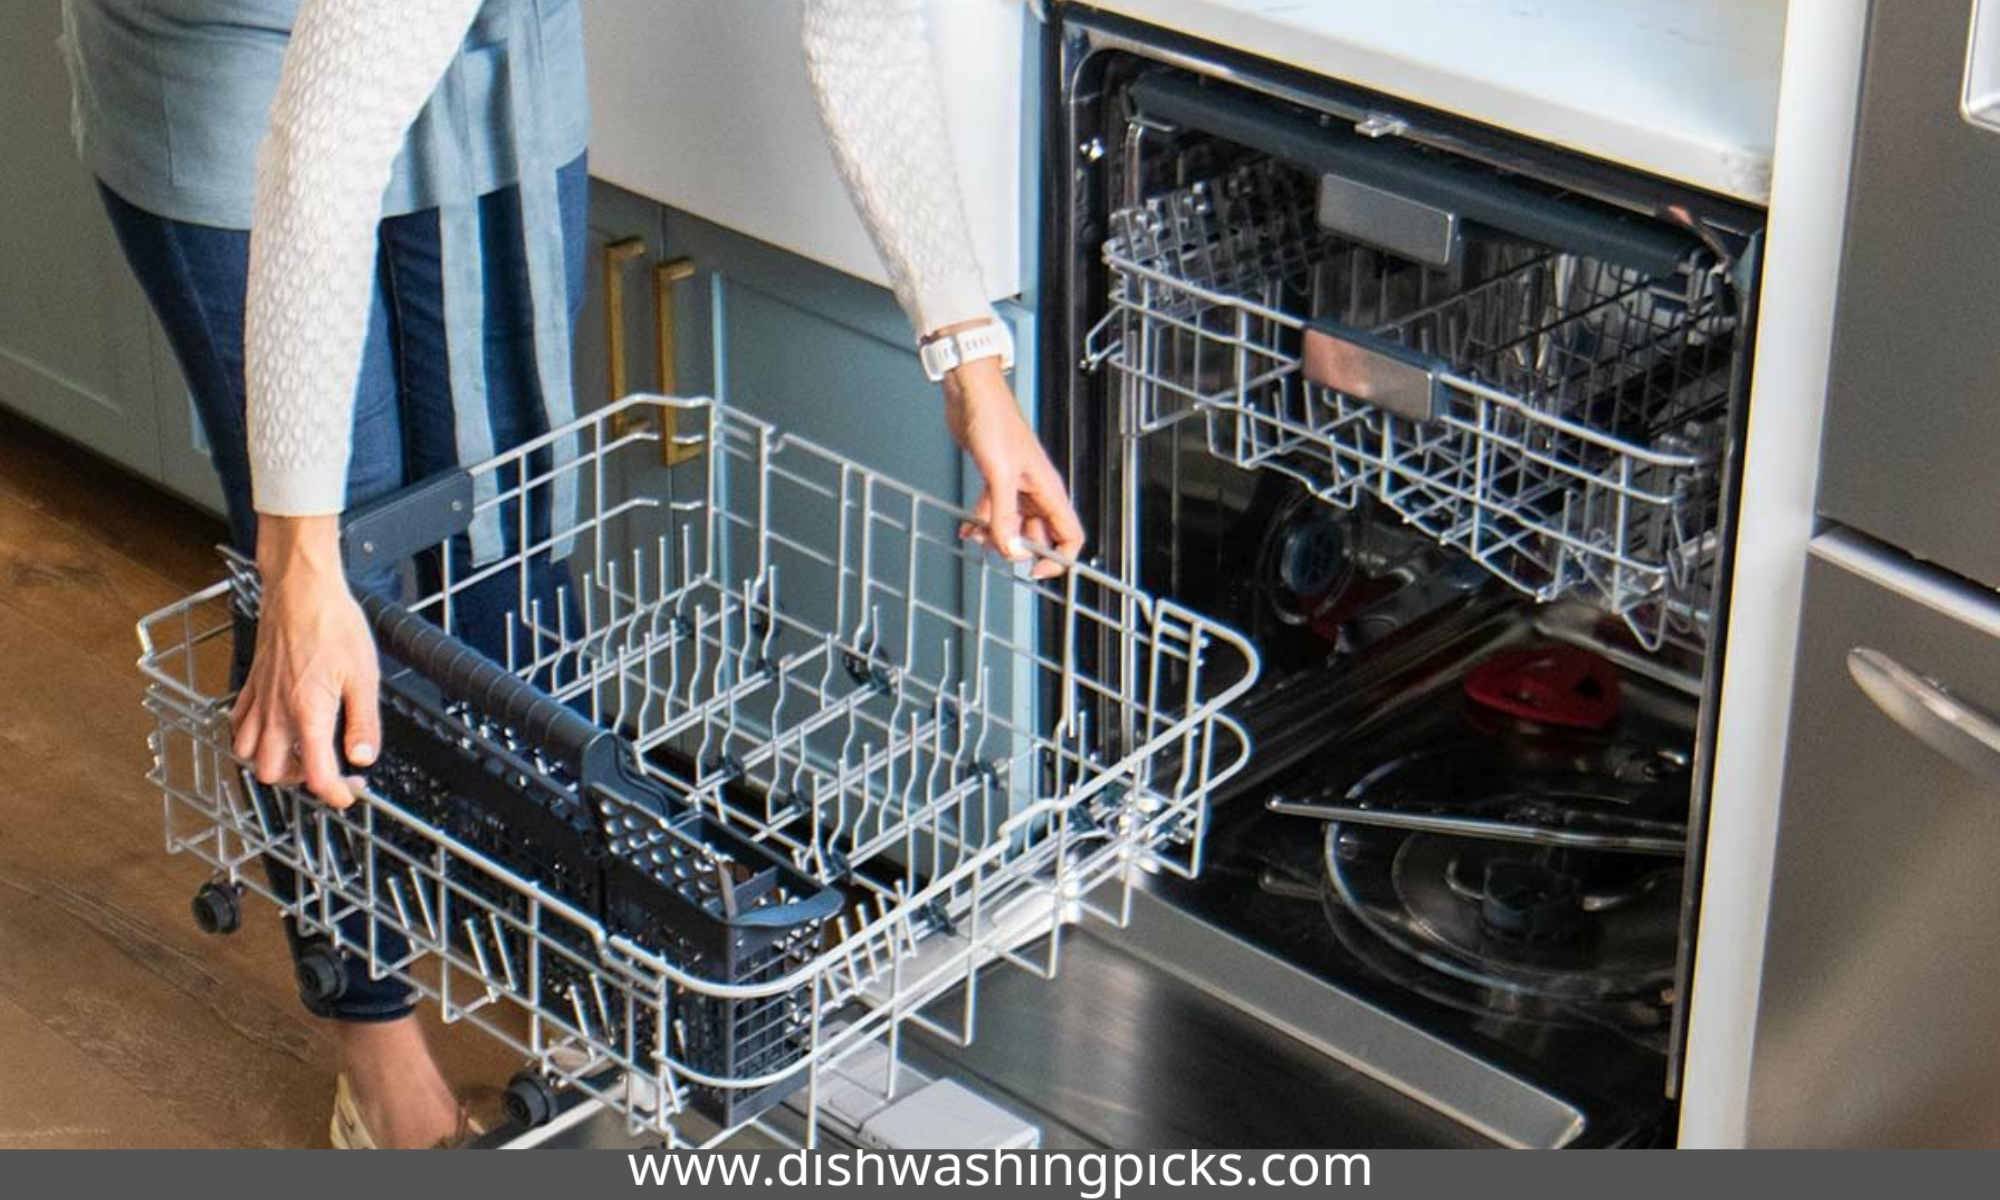 How to Clean the Inside of a Stainless Steel Dishwasher